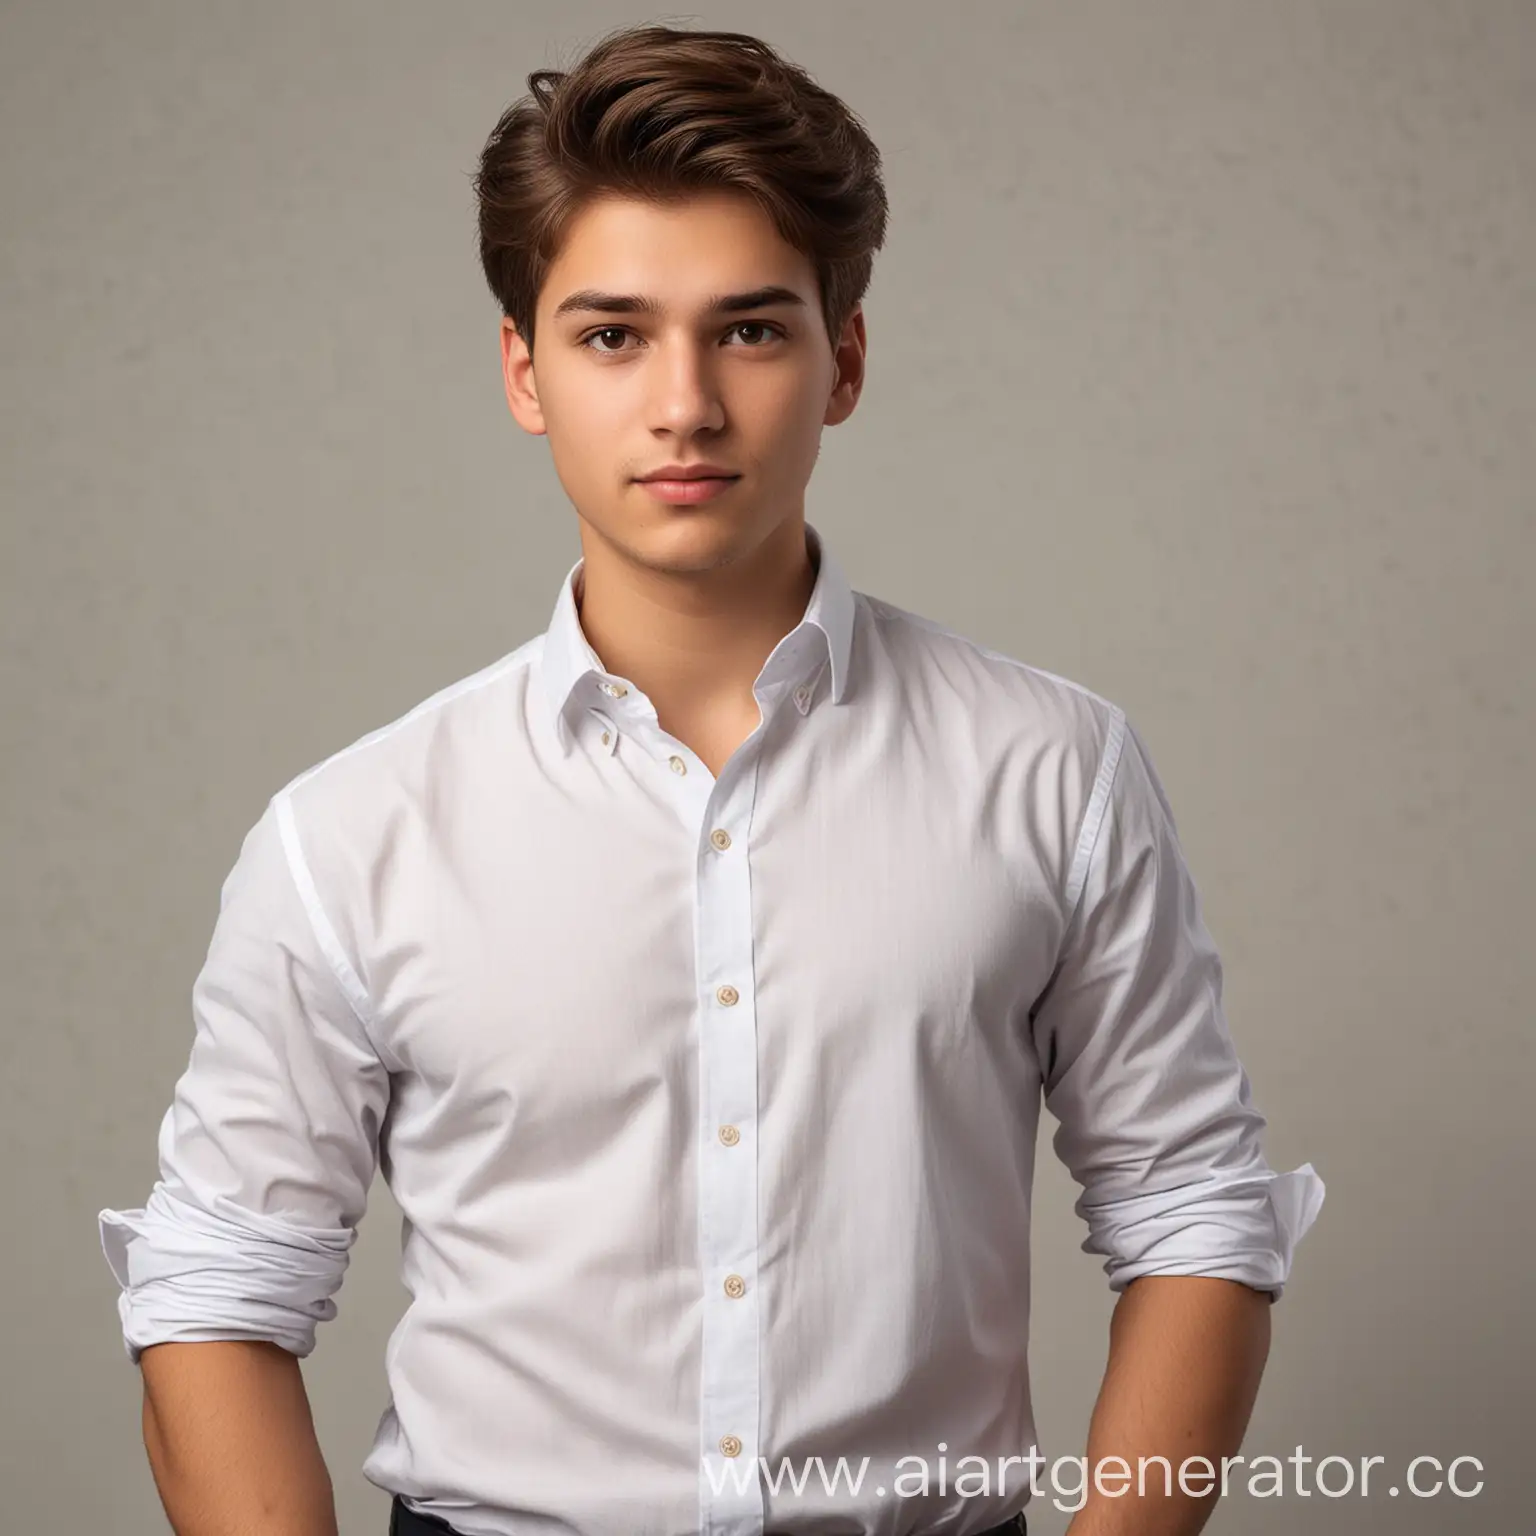 Young-Developer-in-Crisp-White-Shirt-with-Brown-Hair-and-Eyes